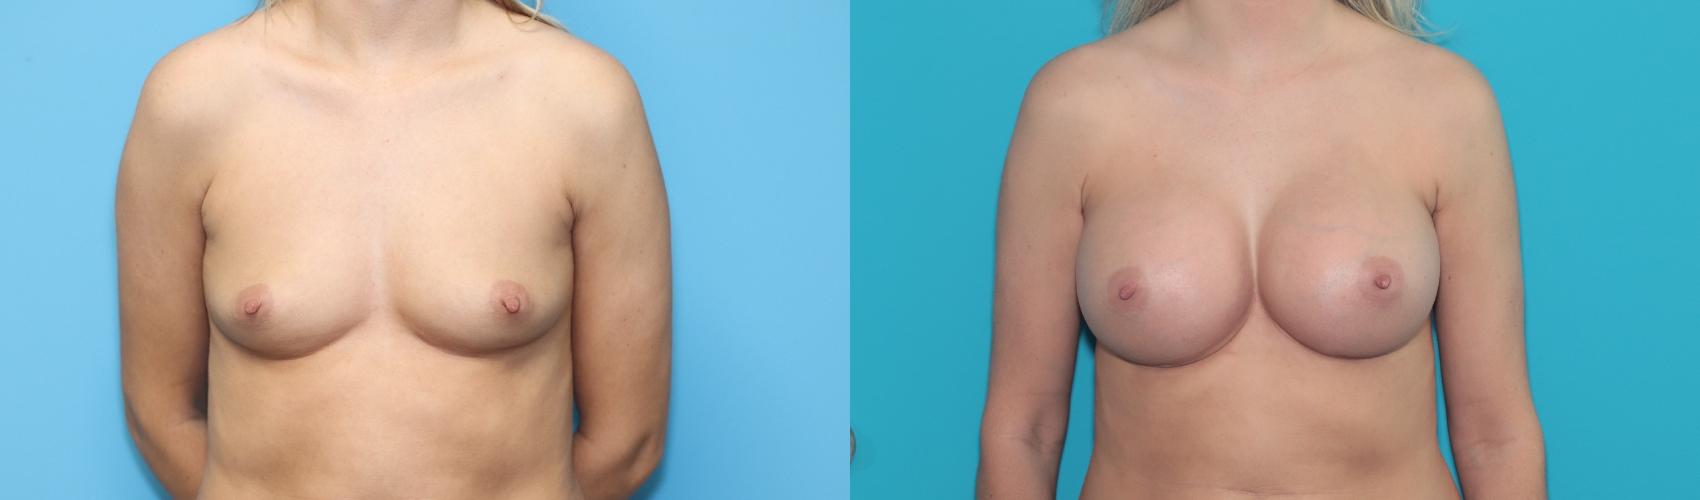 Dr. Carlisle used a 450cc silicone implant on right and 415cc implant on the left to make the breasts more symmetric.